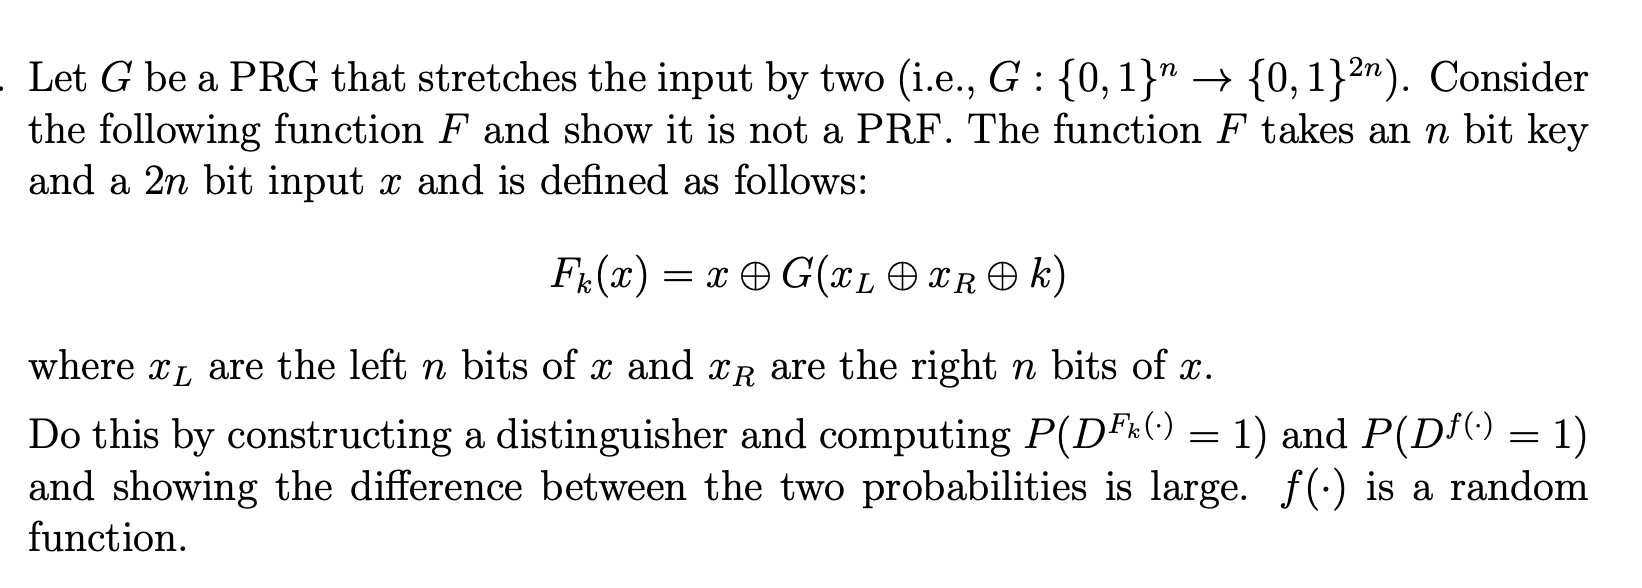 Let G be a PRG that stretches the input by two (i.e., G : {0,1}  {0, 1}2n). Consider the following function F